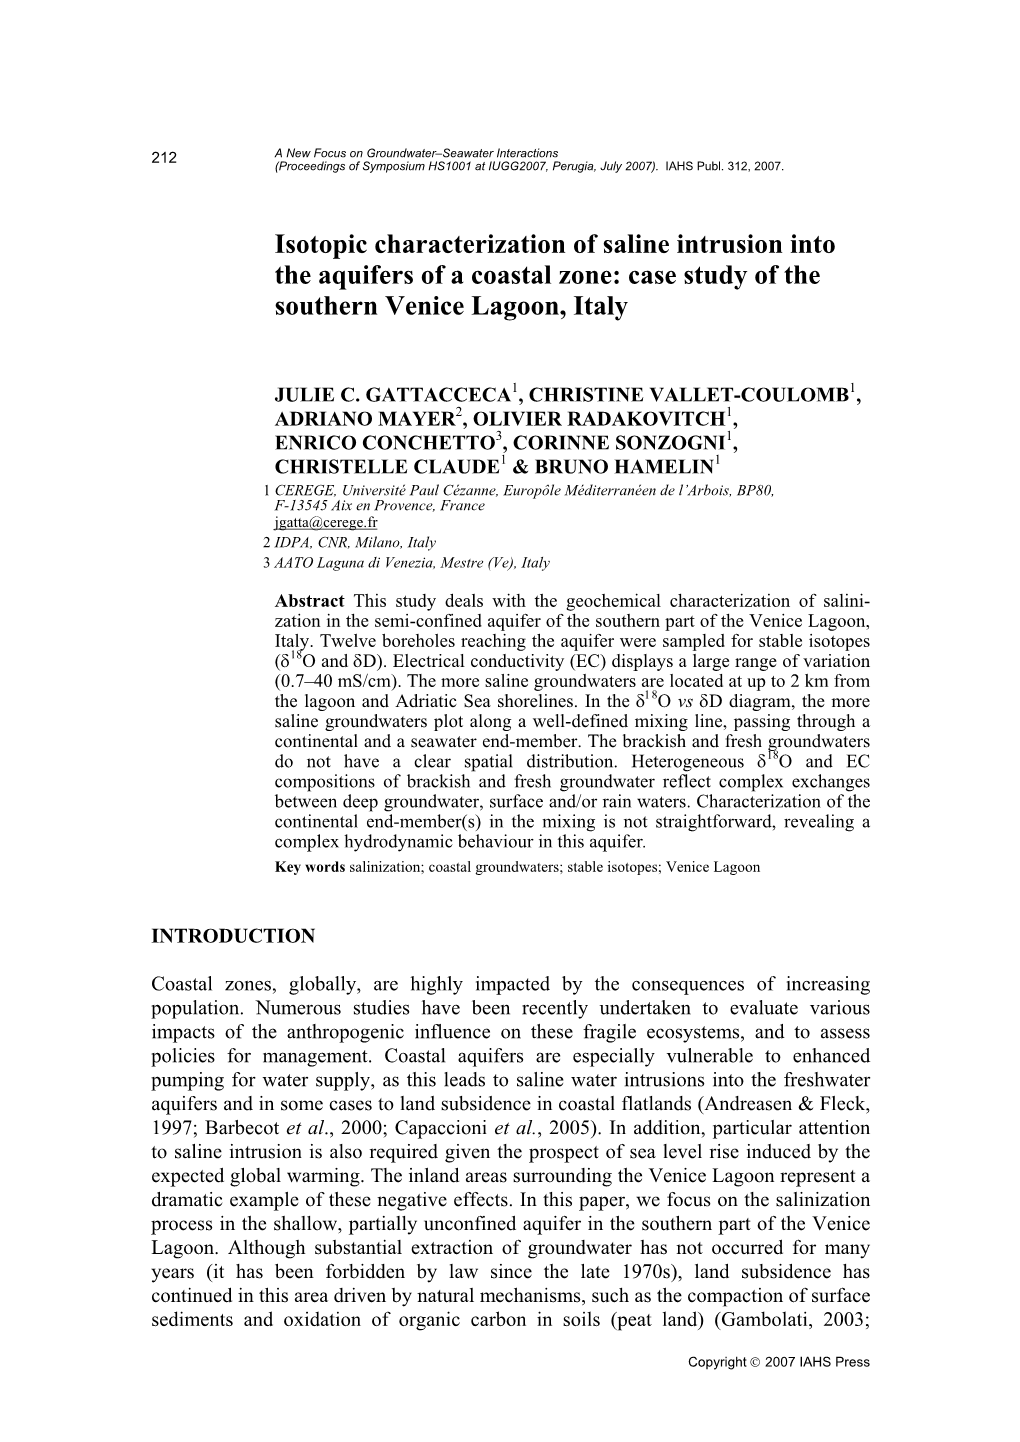 Isotopic Characterization of Saline Intrusion Into the Aquifers of a Coastal Zone: Case Study of the Southern Venice Lagoon, Italy